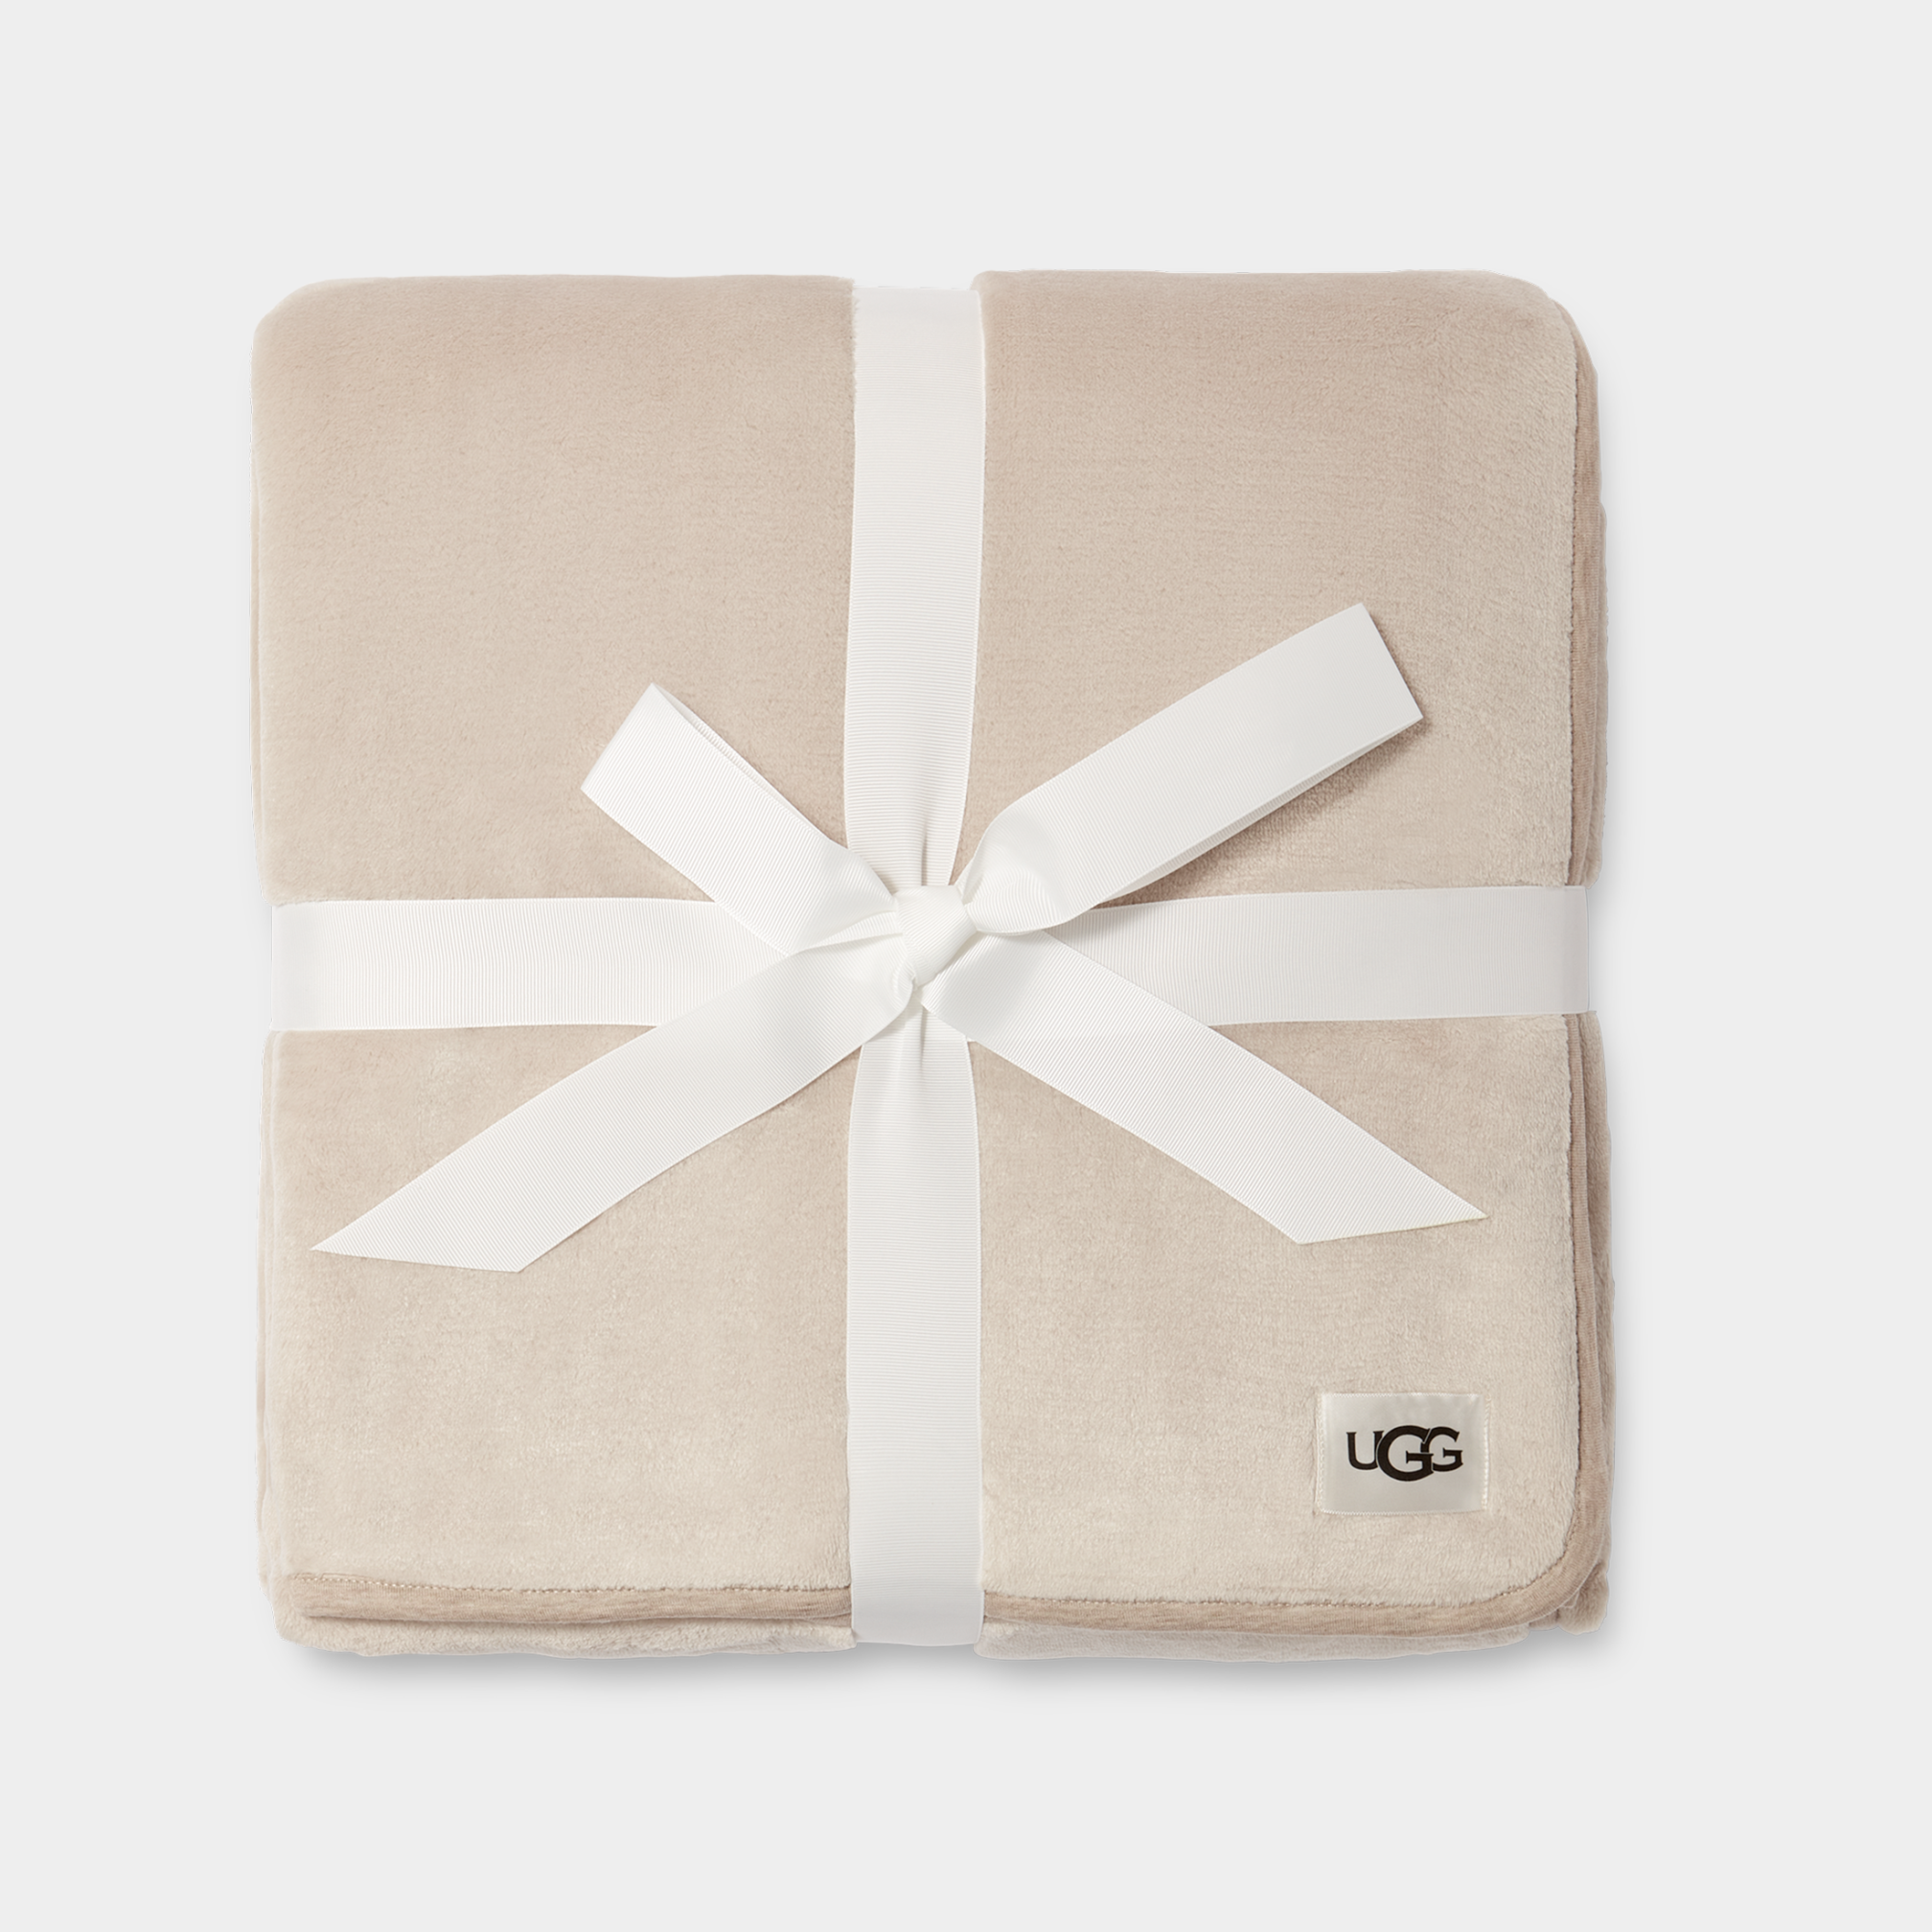 Duffield Large Spa Throw Blanket | UGG